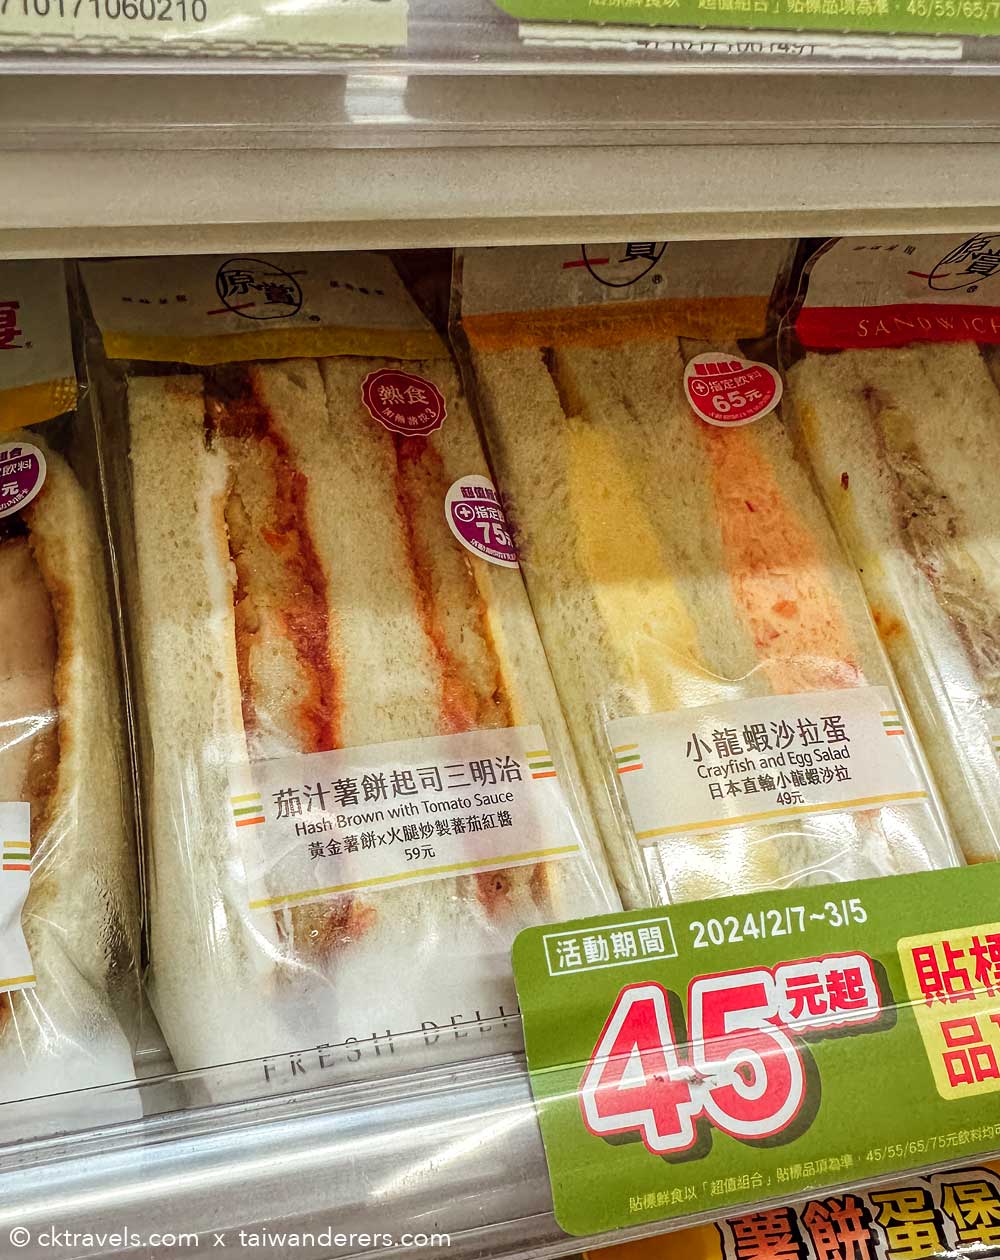 hash brown with tomato sauce sandwich 7 eleven taiwan